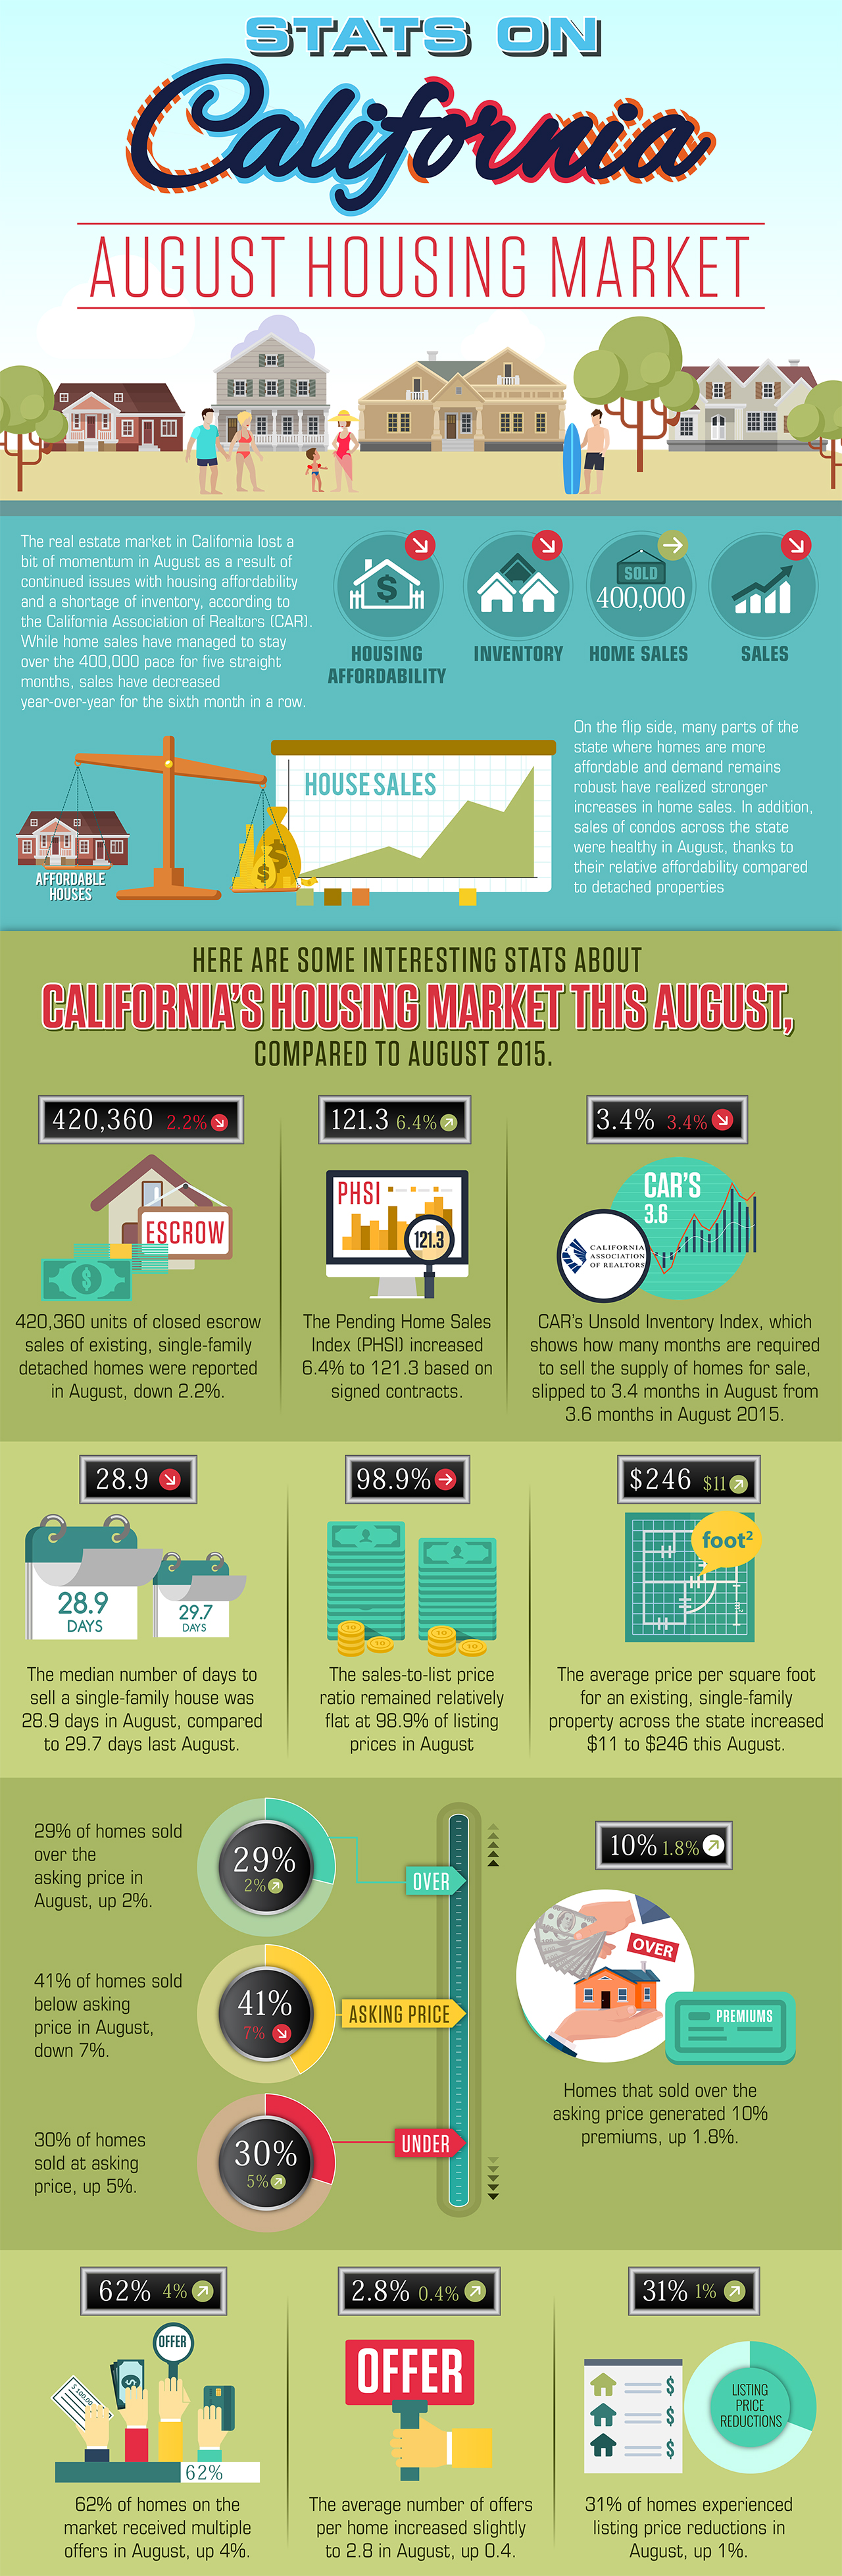 stats-on-californias-august-housing-market-infographic